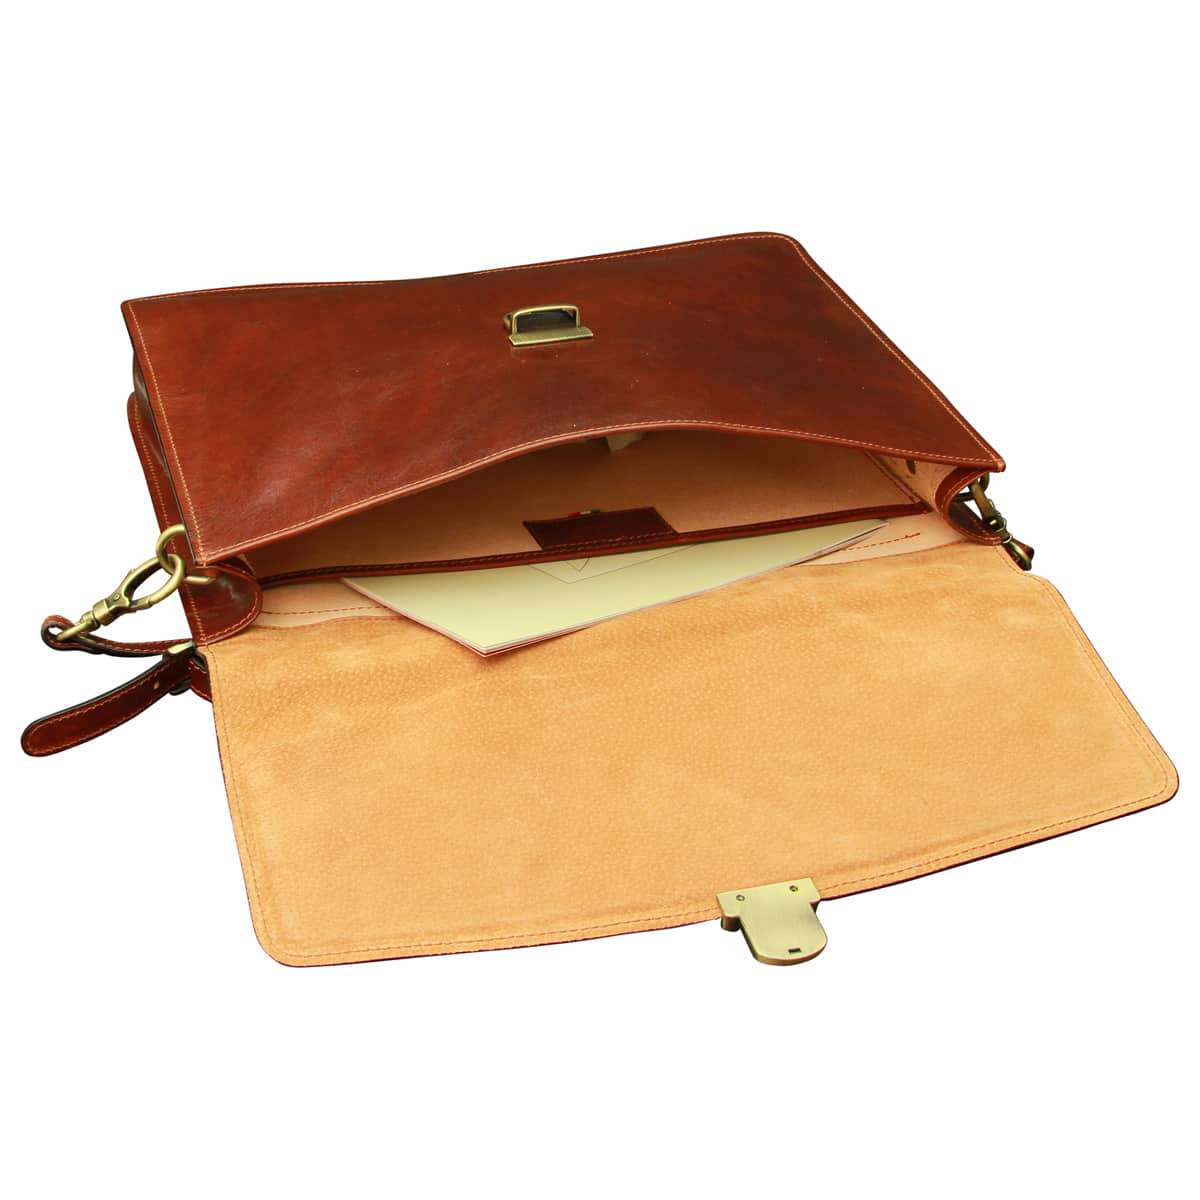 Business Briefcase - Brown | 407505MA US | Old Angler Firenze